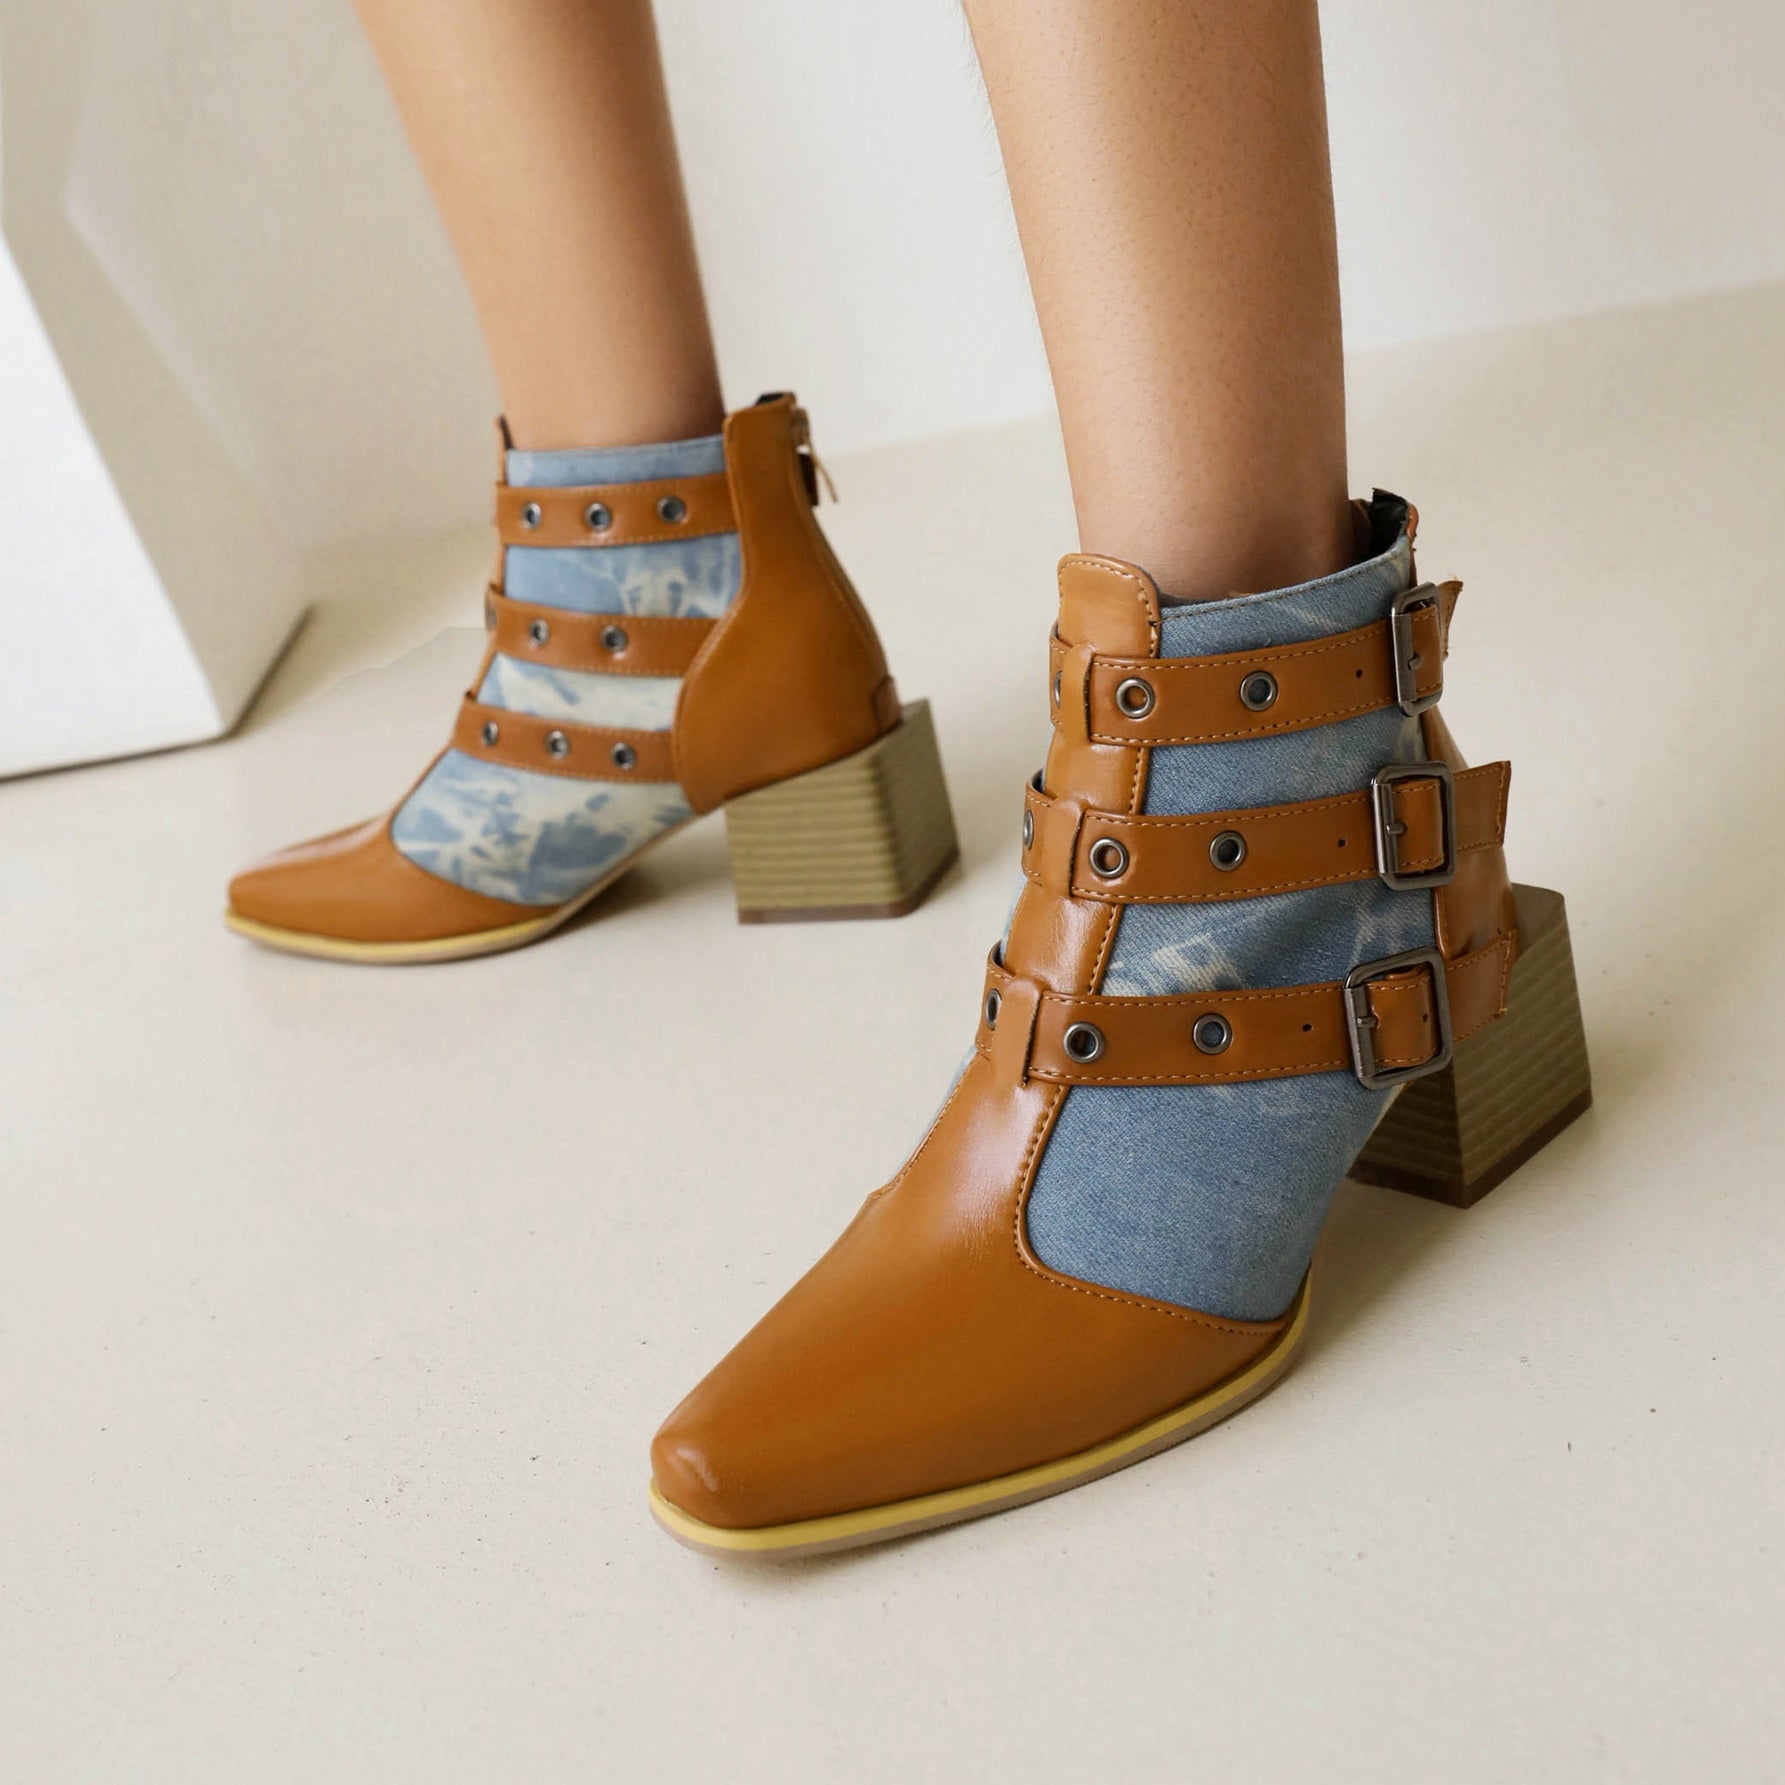 Bigsizeheels Fashion pointed square heel ankle boots - Brown&Blue freeshipping - bigsizeheel®-size5-size15 -All Plus Sizes Available!